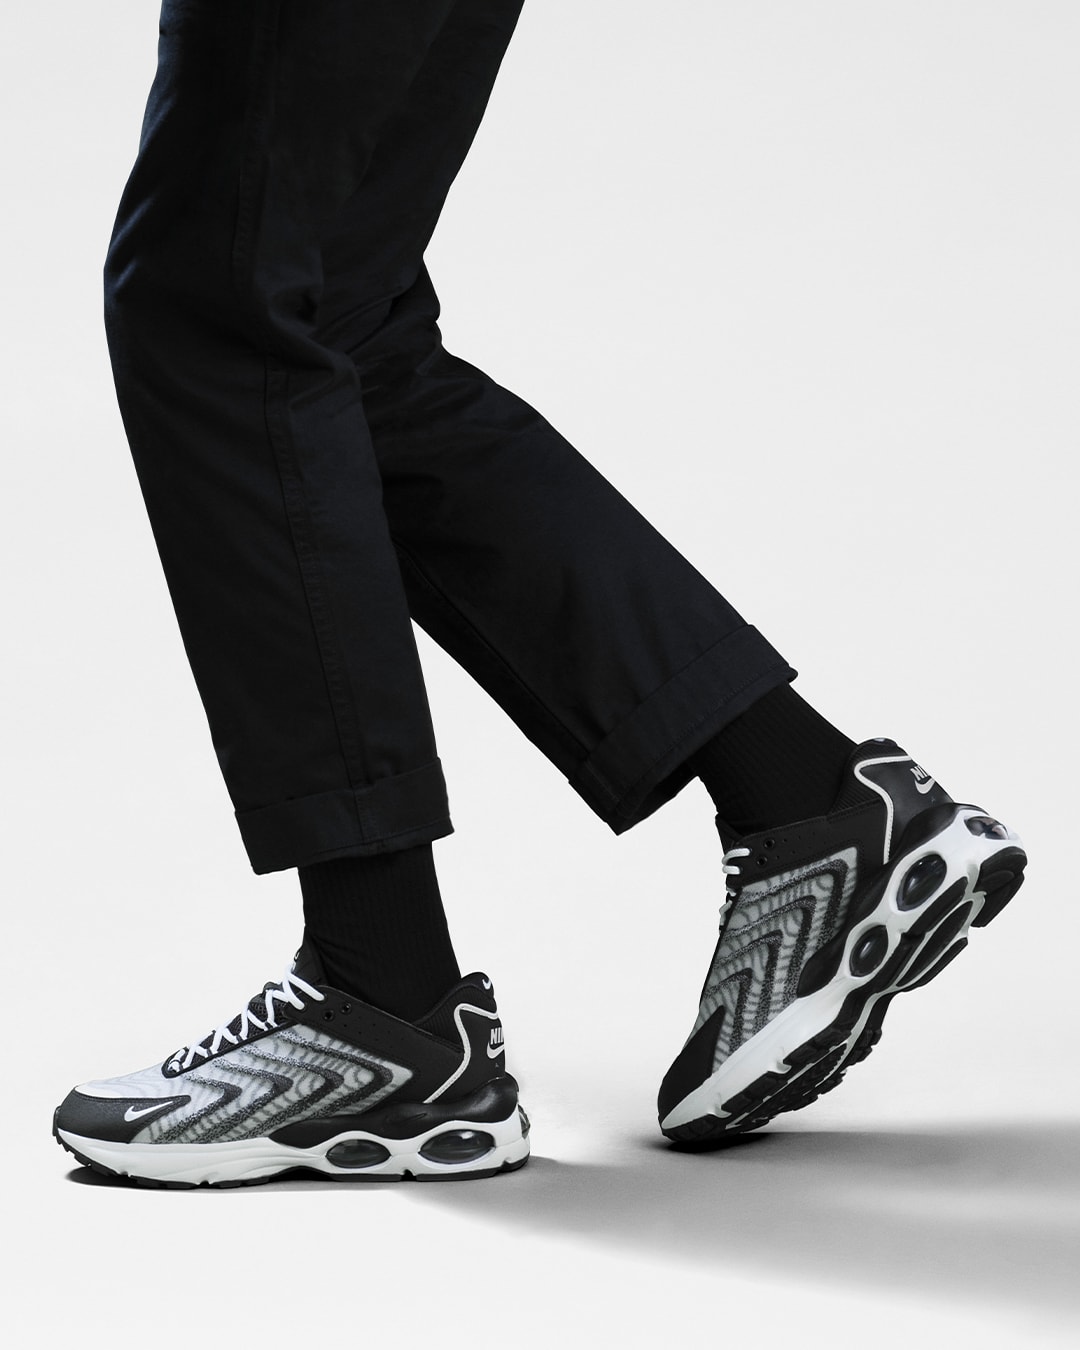 The Nike Air Max Tailwind 1 on foot.